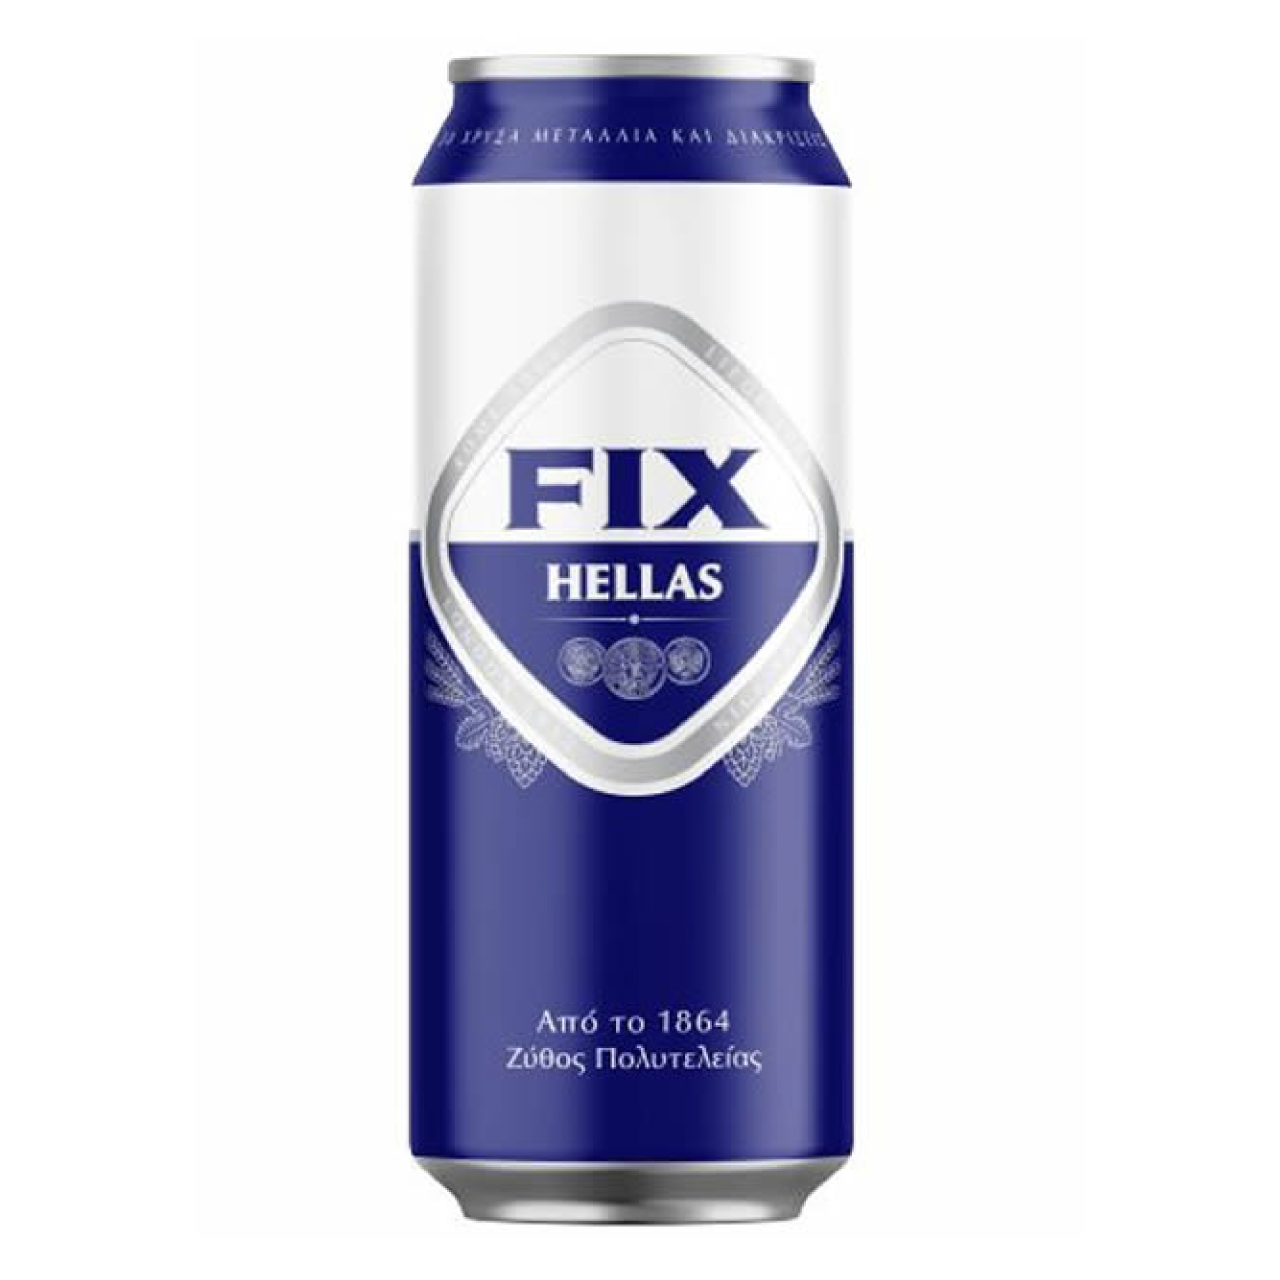 Fix beer can 500ml